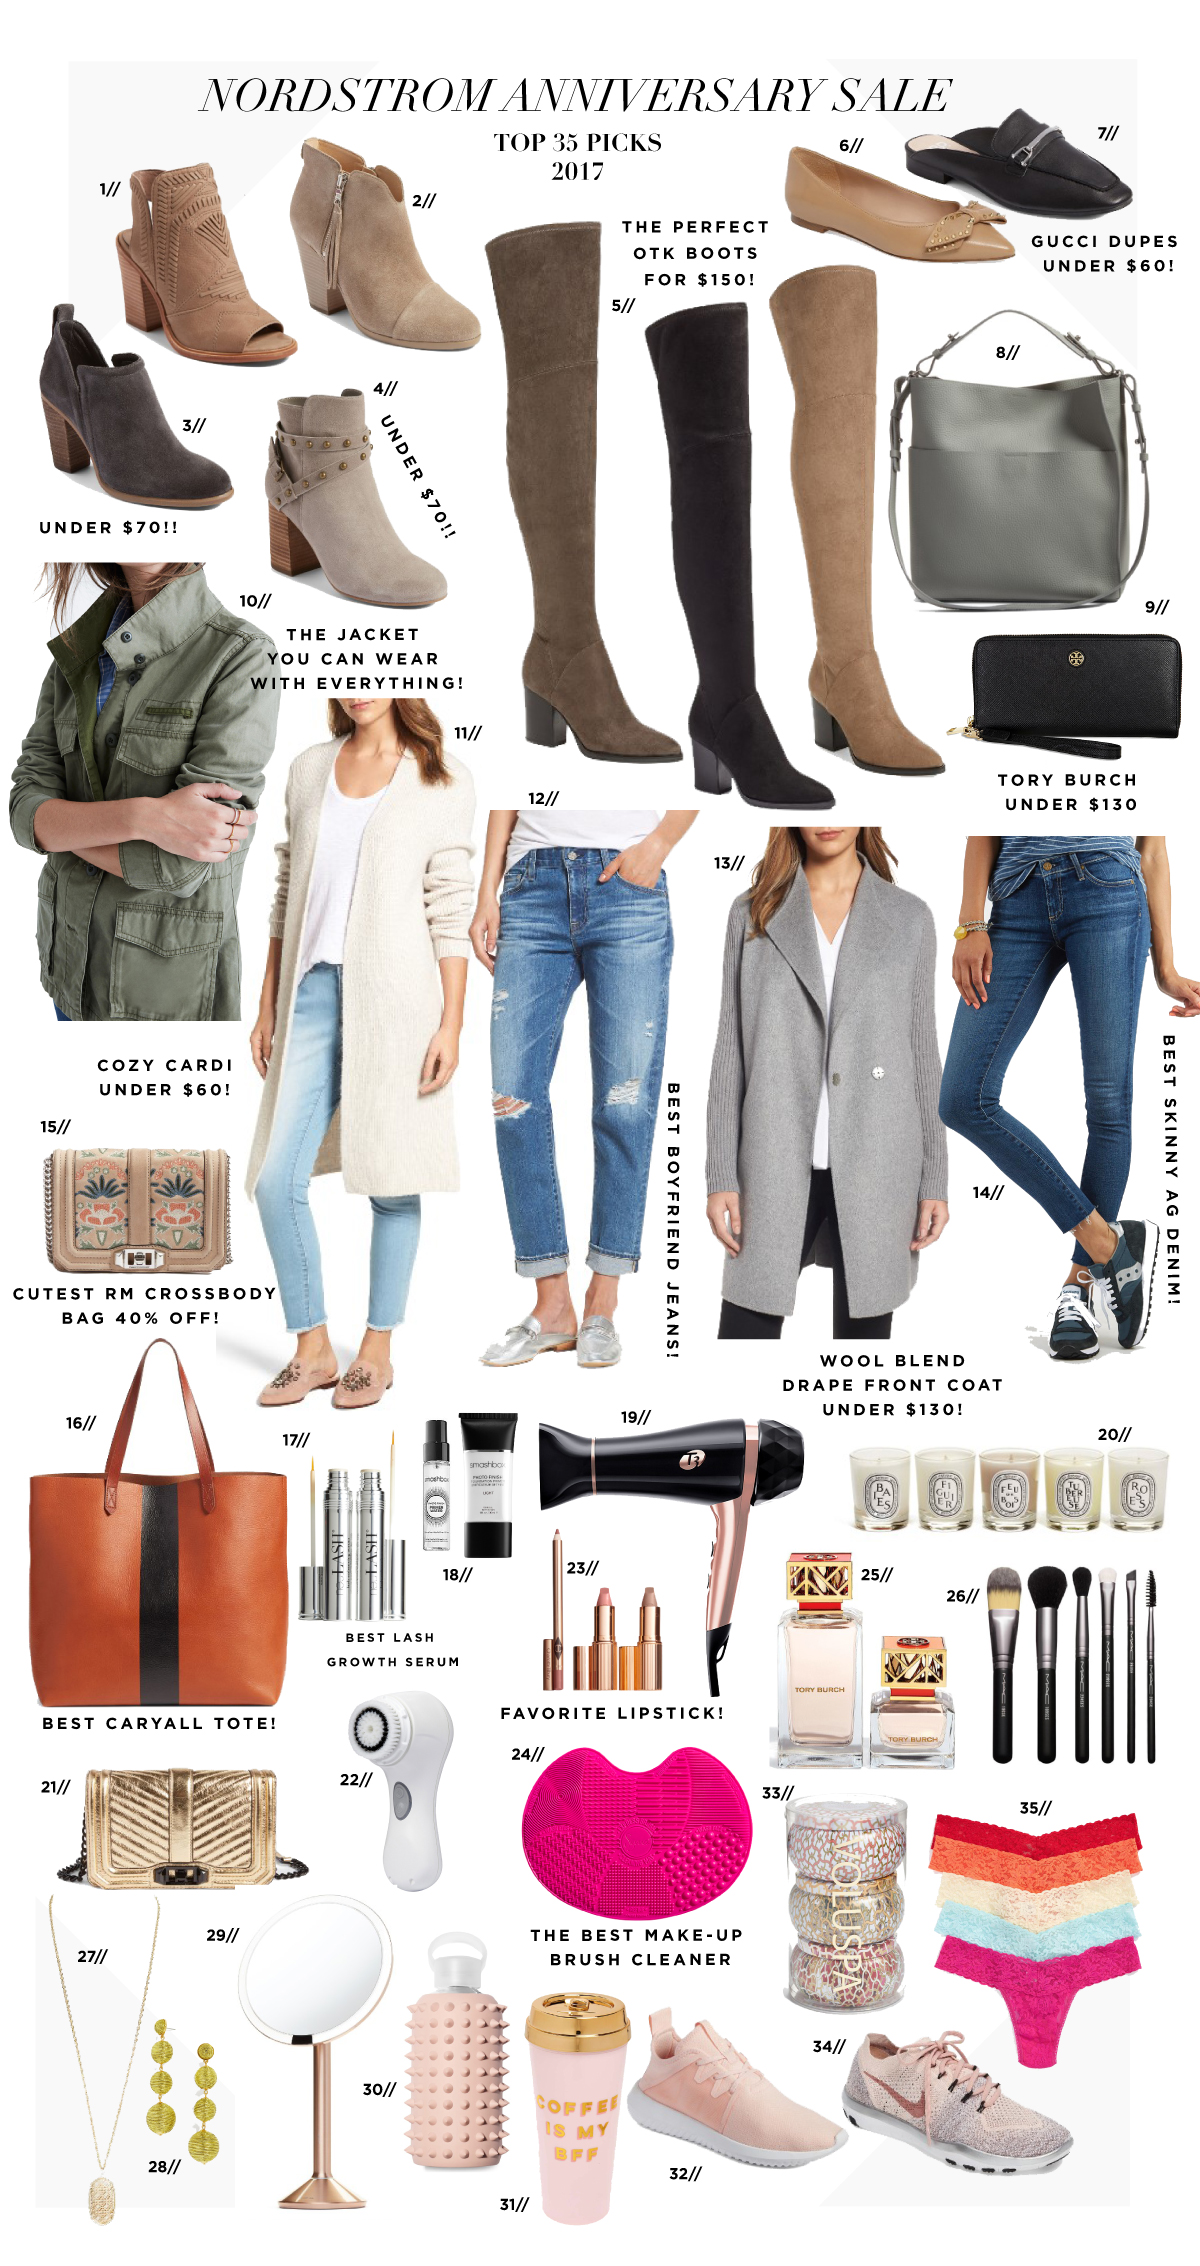 Nordstrom Anniversary Sale Guide Early Access + $1,000 Giveaway